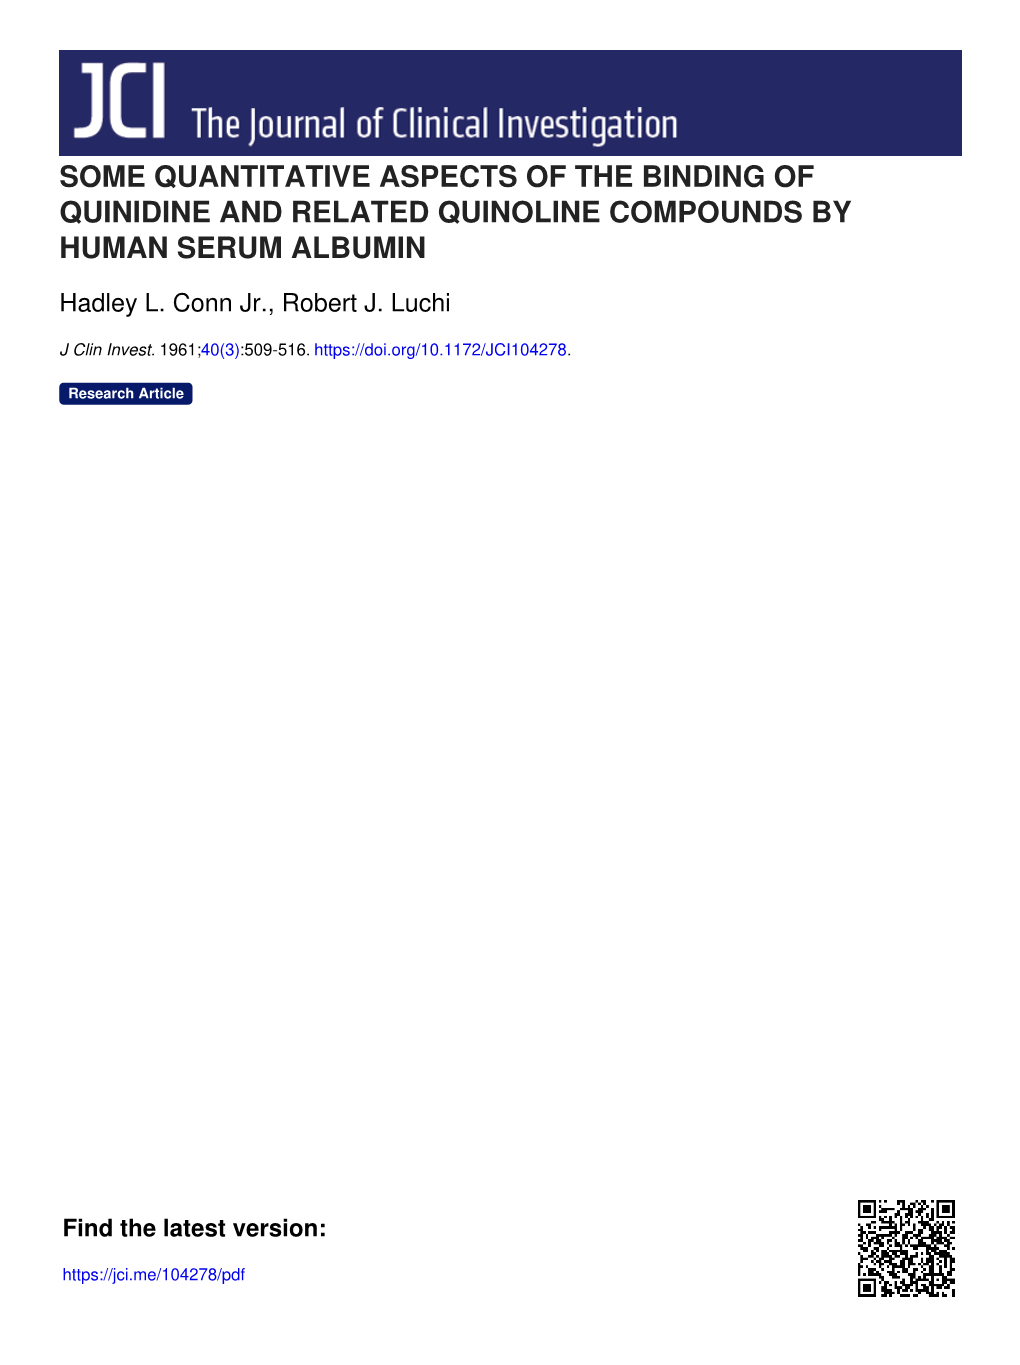 Some Quantitative Aspects of the Binding of Quinidine and Related Quinoline Compounds by Human Serum Albumin